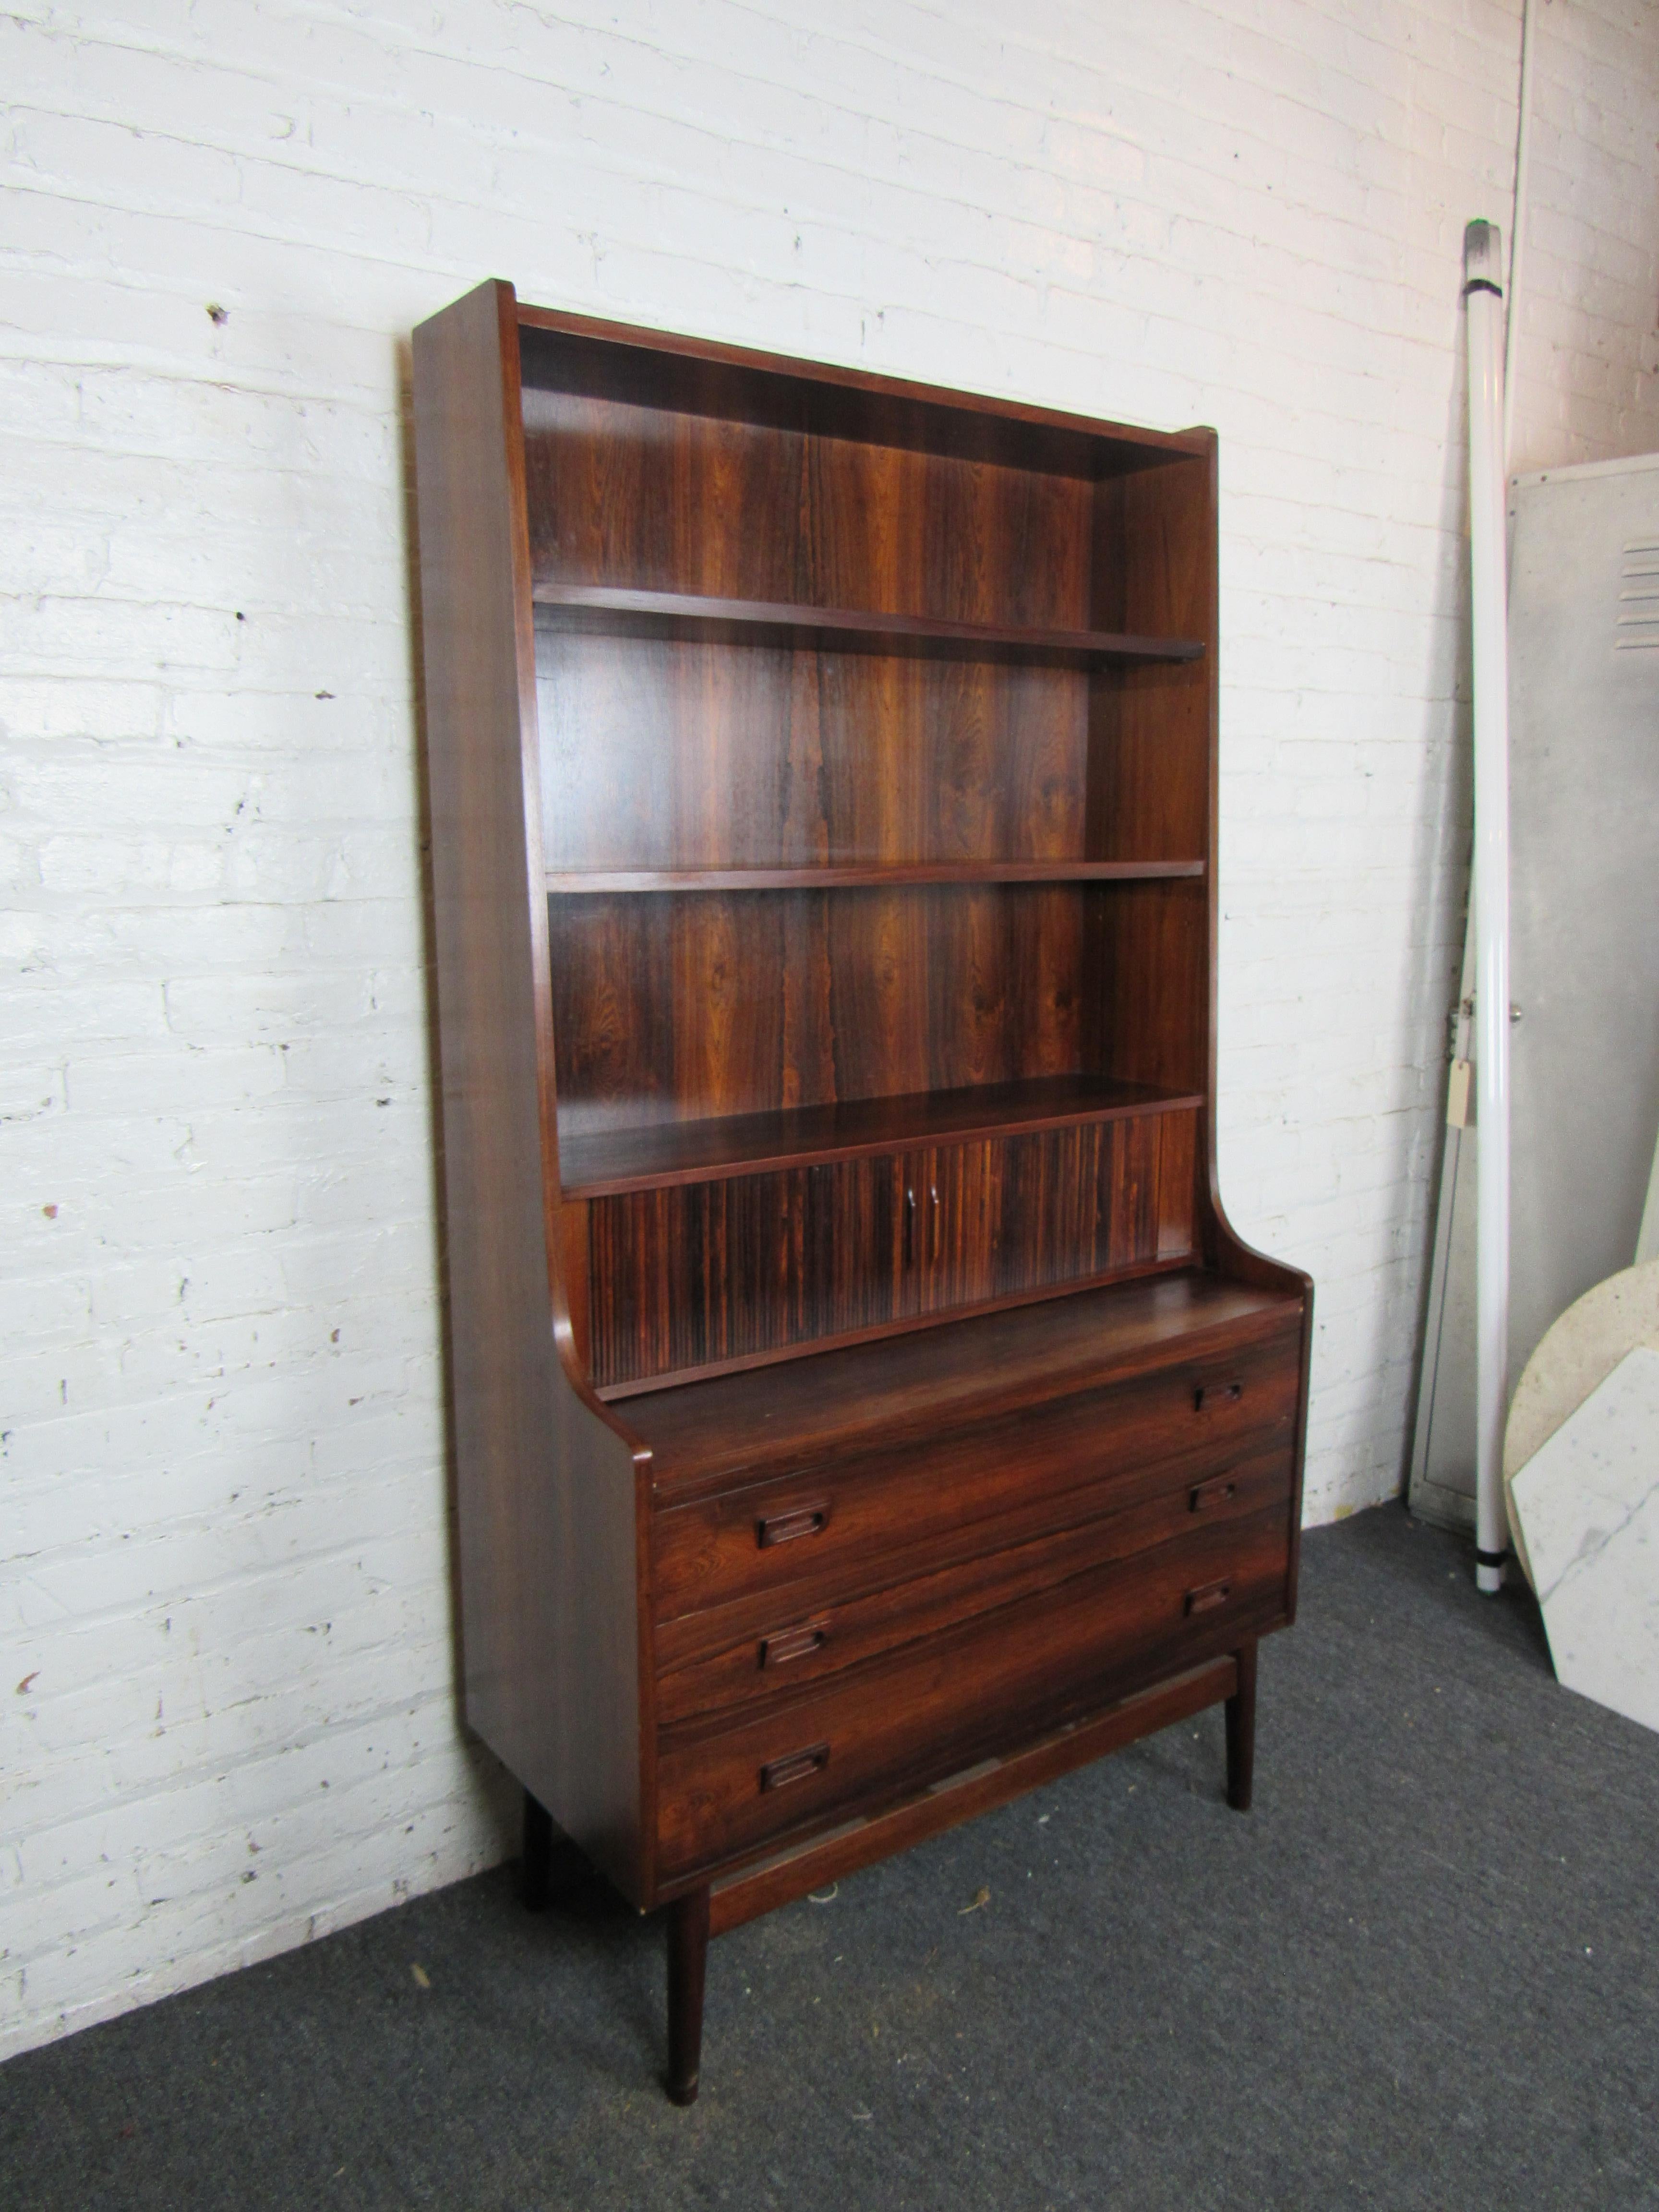 An incredible vintage secretary dresser in rich rosewood, this Mid-Century Modern piece offers generous storage through three drawers as well as shelves for displaying items. Please confirm item location with seller (NY/NJ).